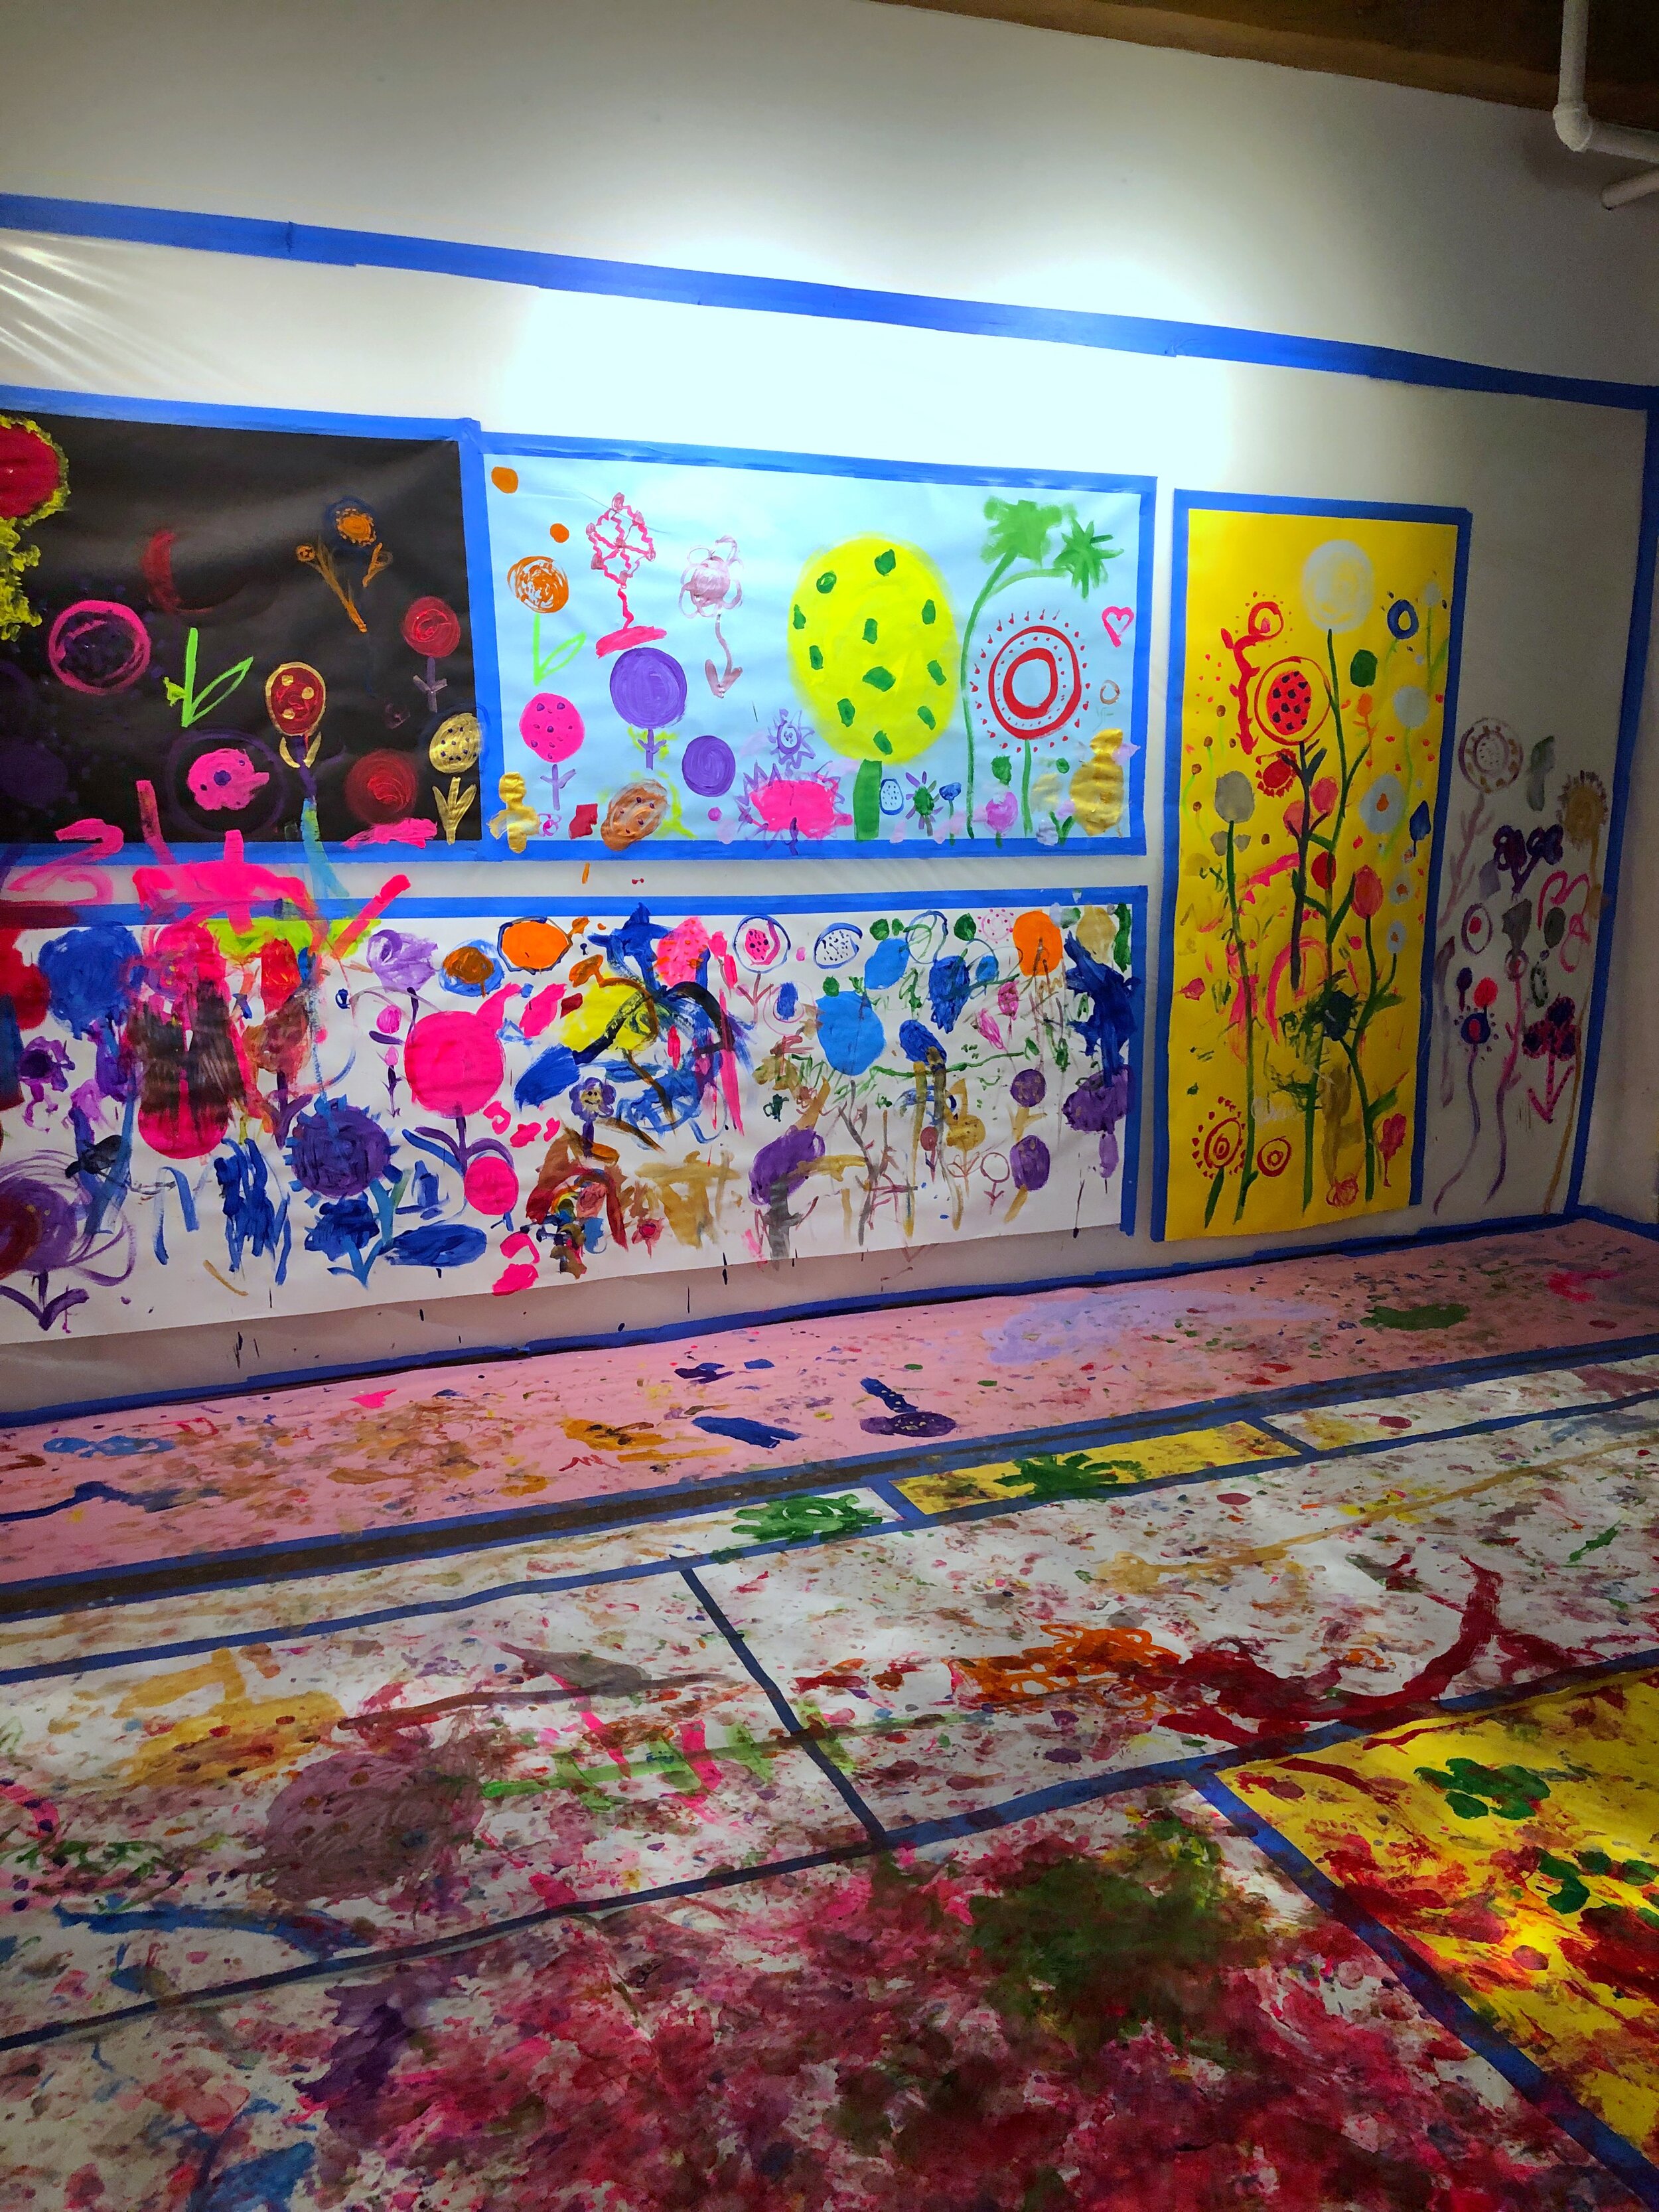 GIANT Interactive Art Workshop with Herve Tullet — The GIANT Room